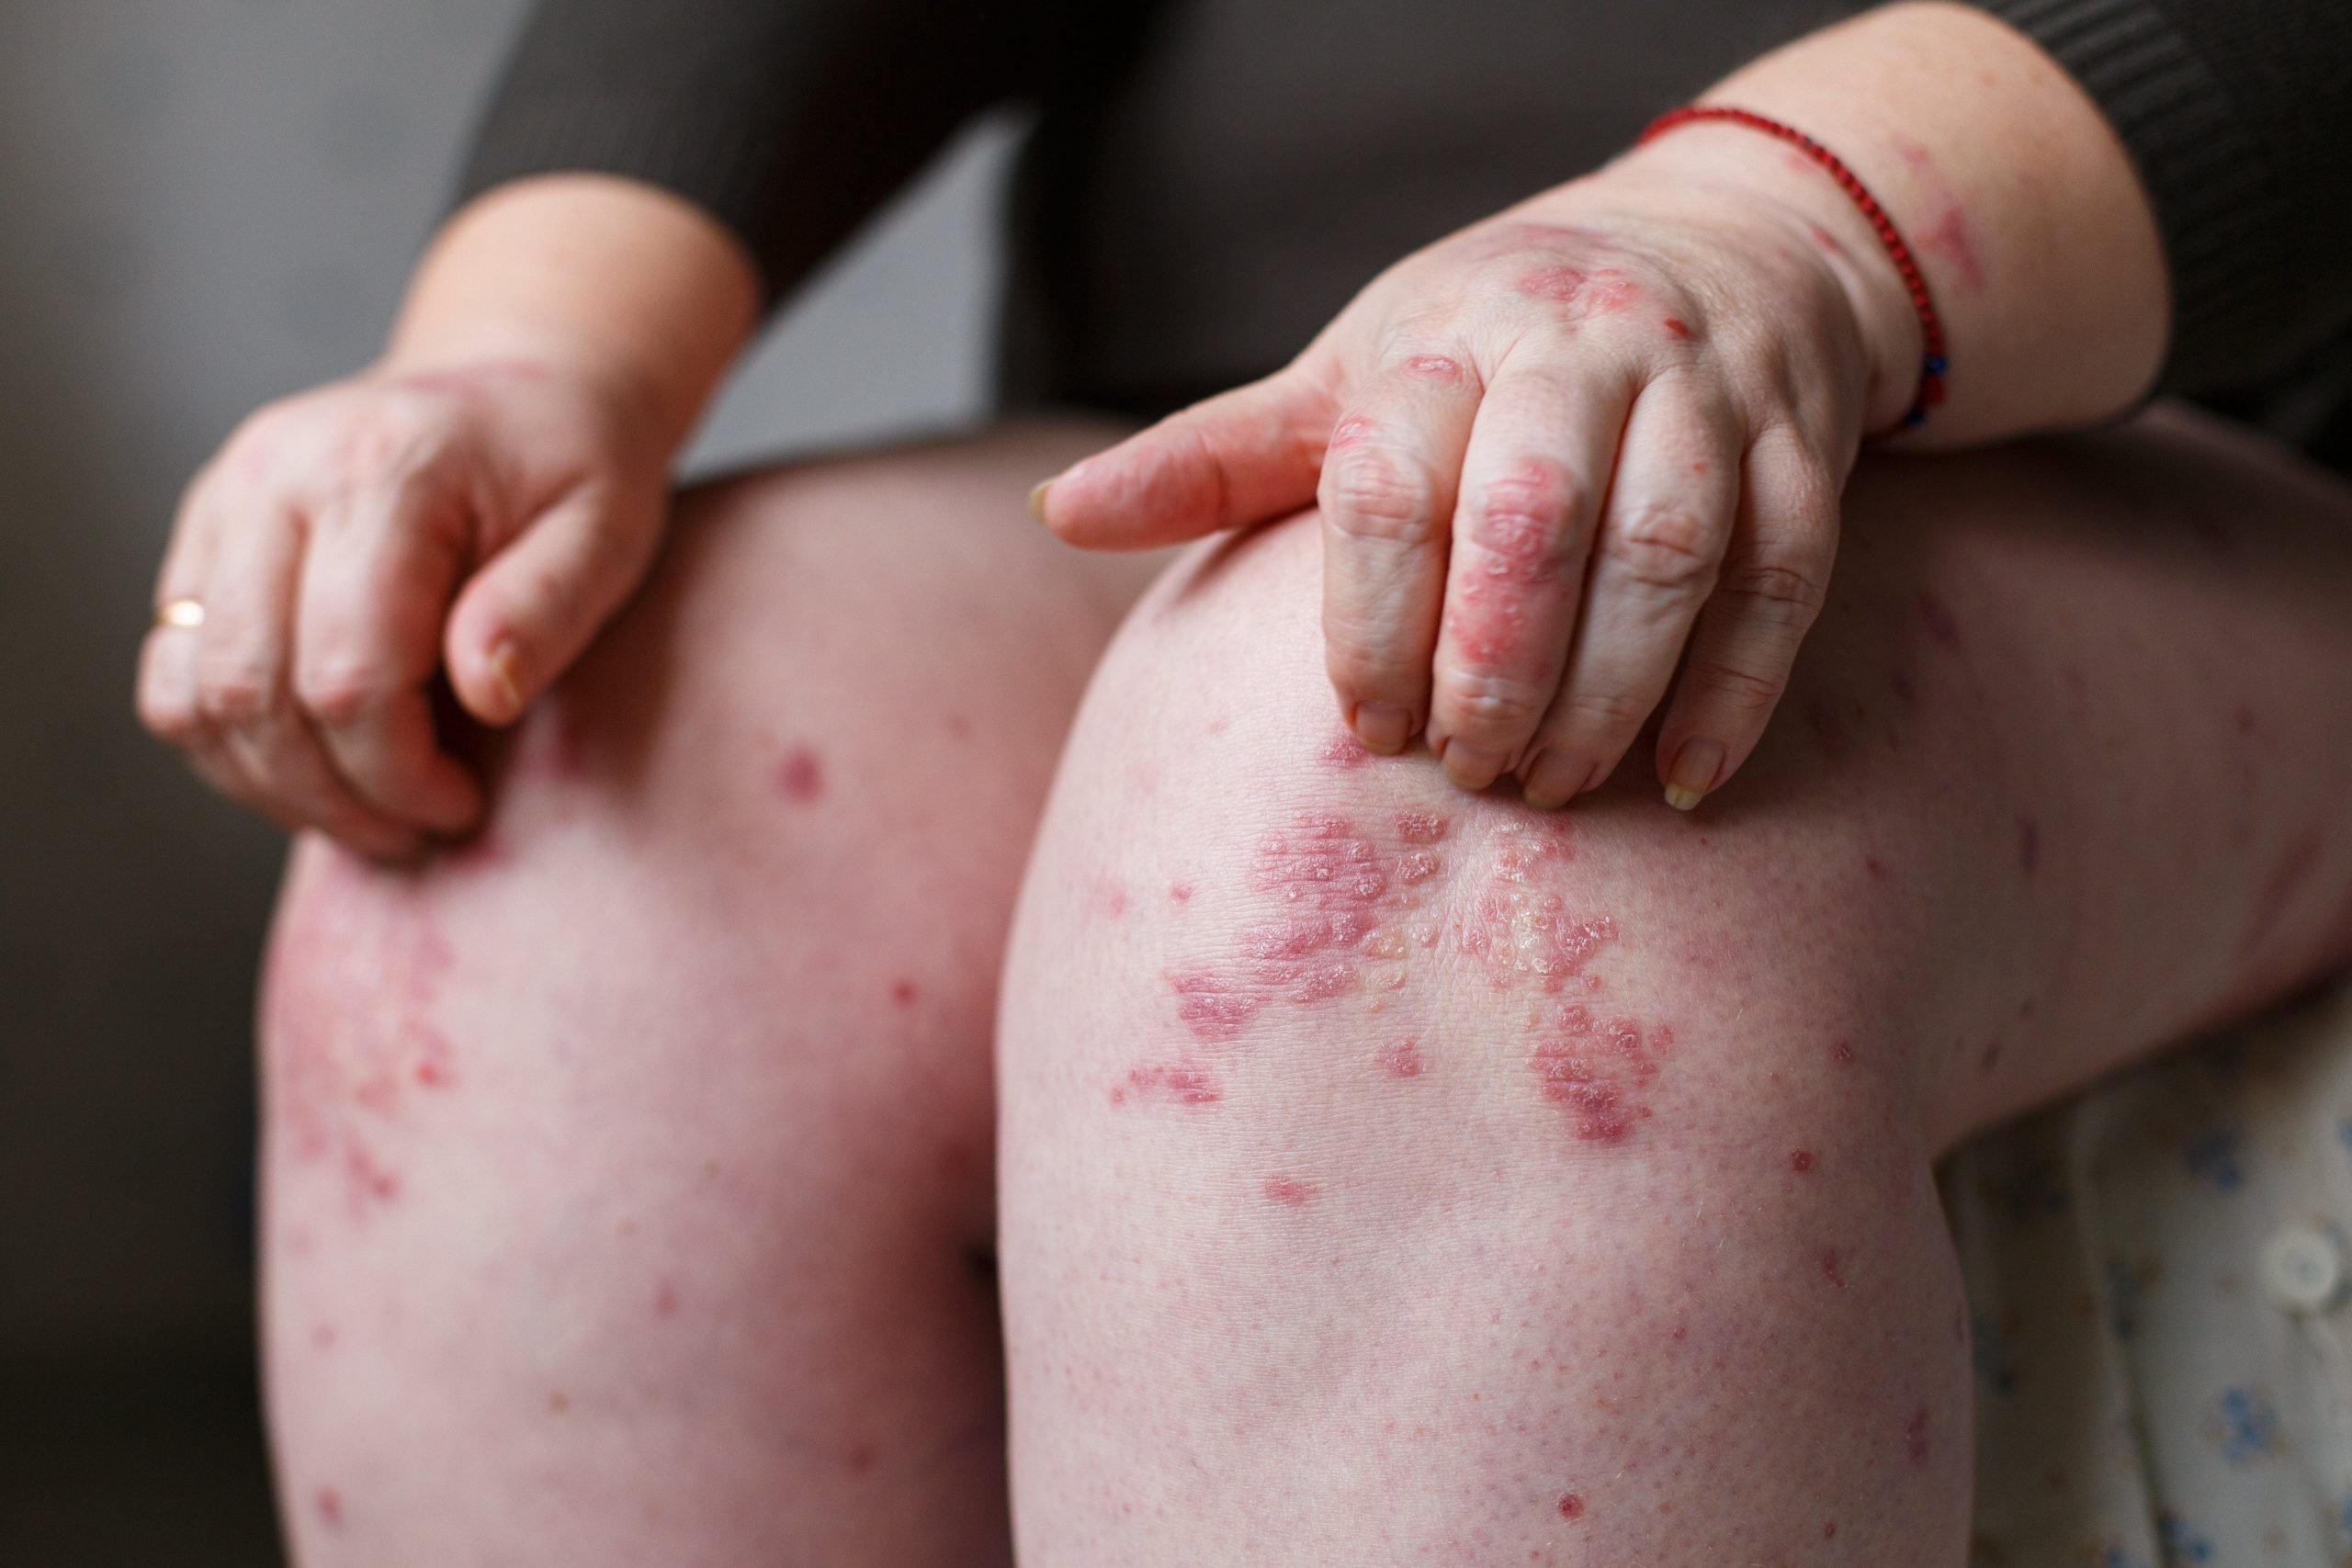 The connection between multiple sclerosis and psoriasis